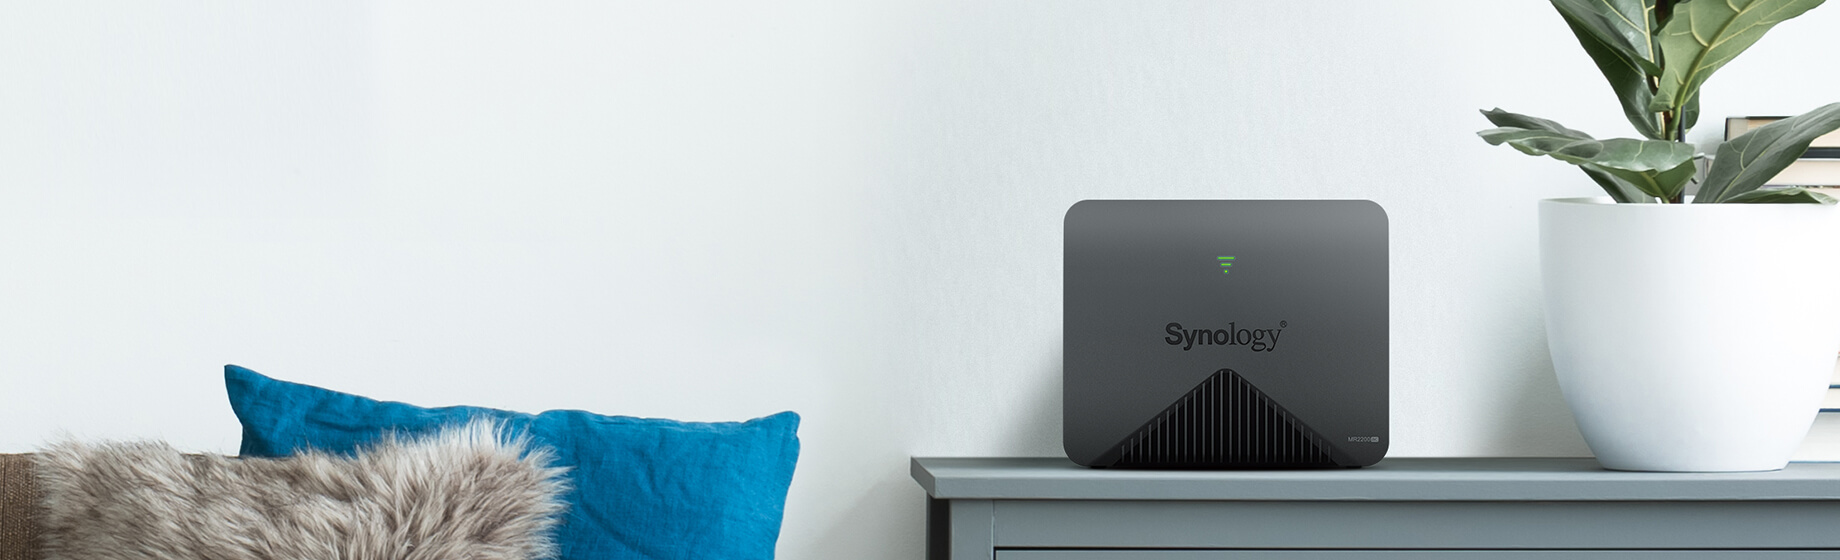 Synology product